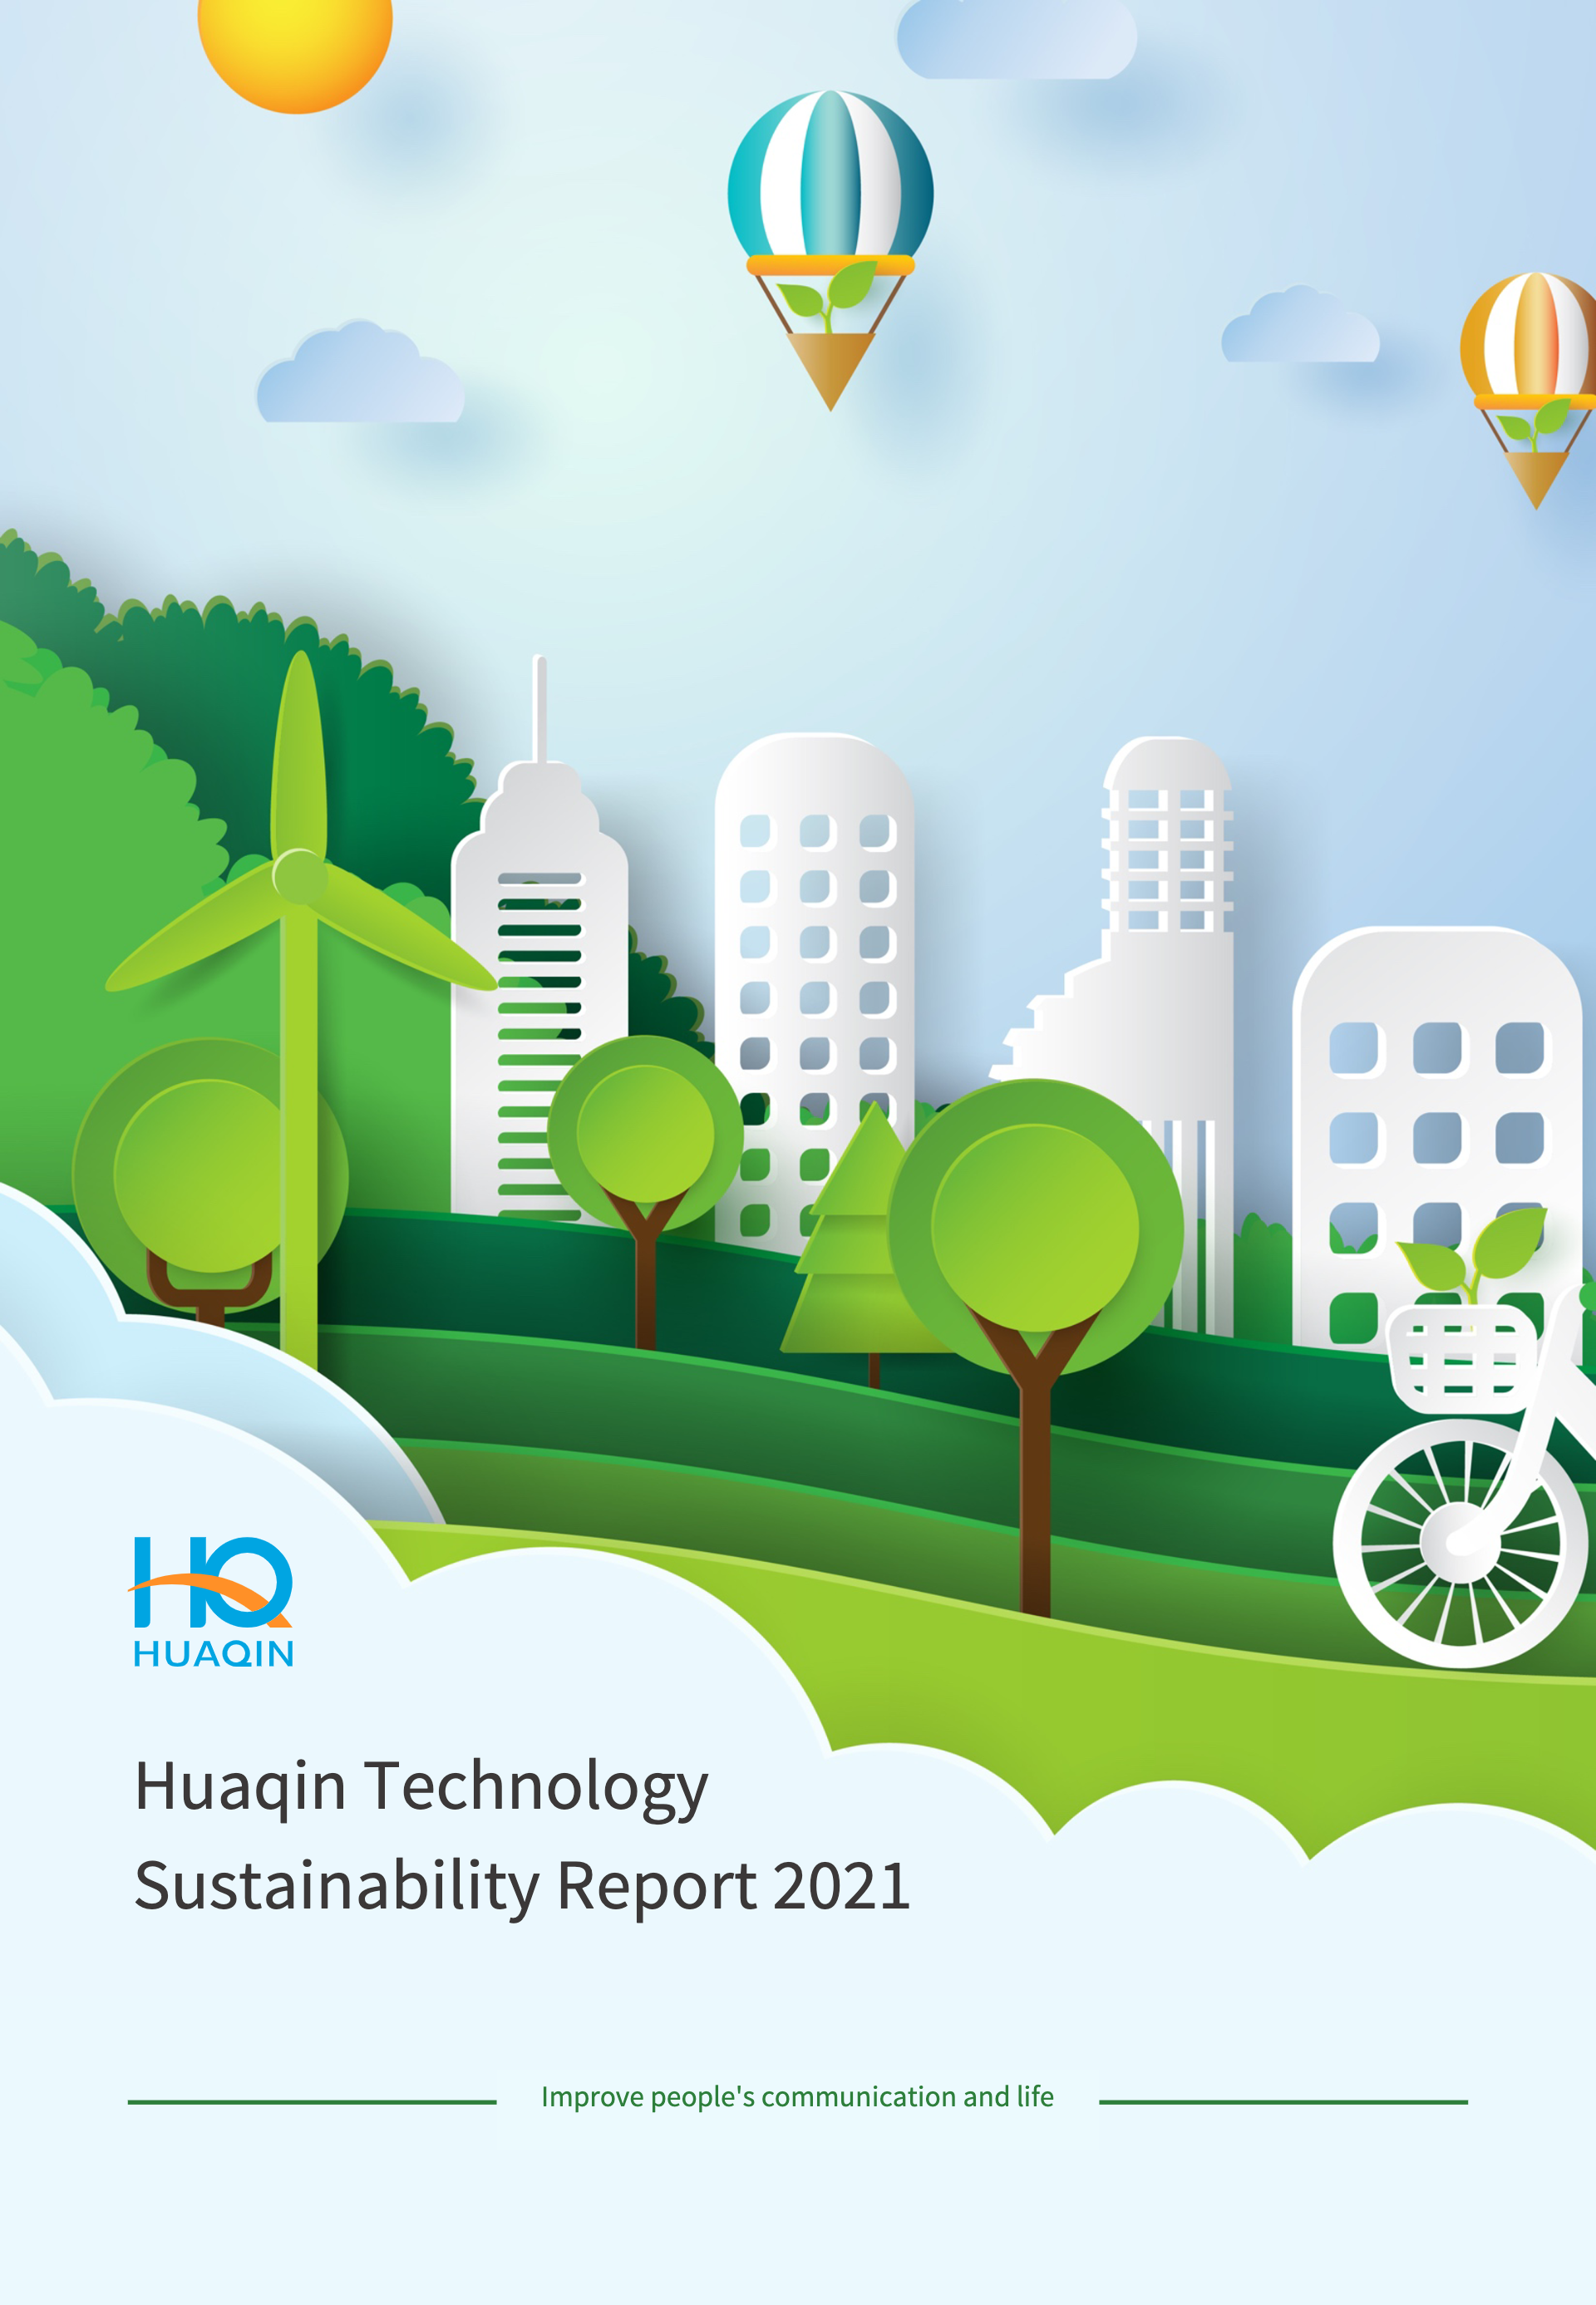 Huaqin Technology Sustainability Report 2021